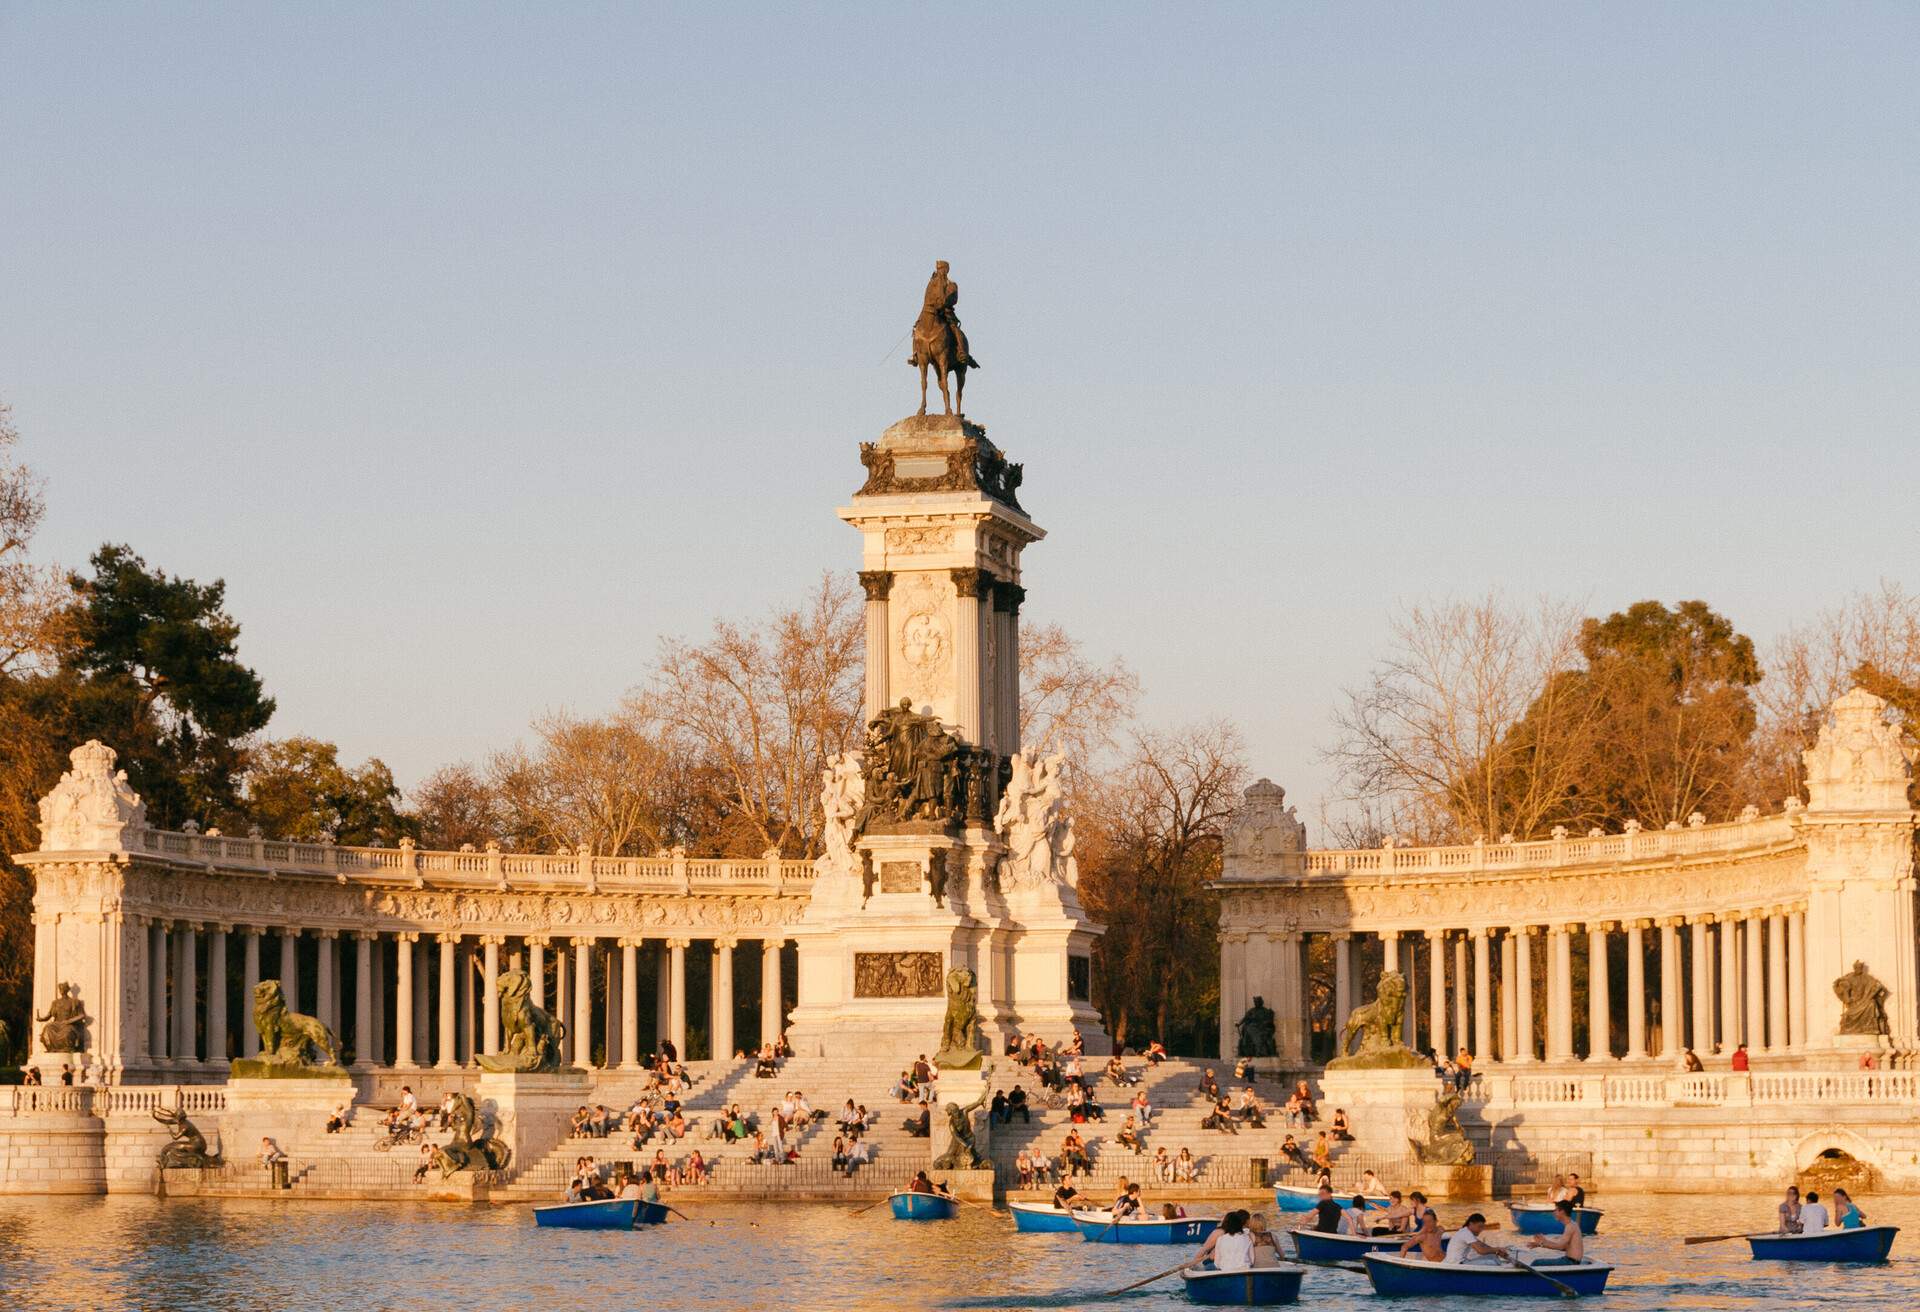 A monument of a horse rider on a large pedestal with other sculptures below it is backed by colonnades with steps leading to a pool where people paddle boats.